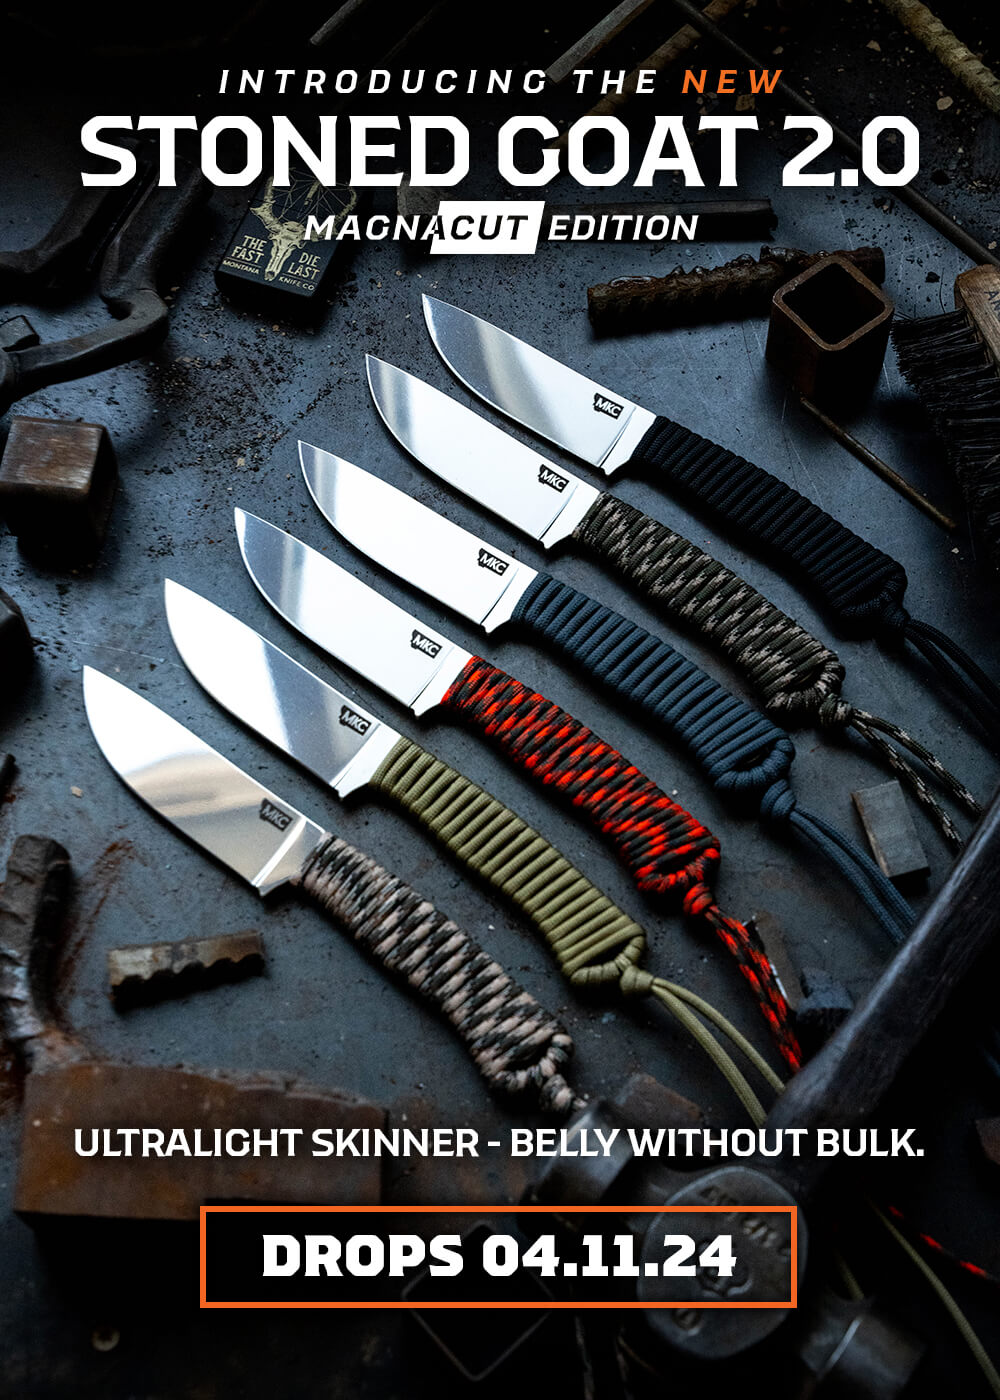 Are these wholesale sites total scams? : r/knives